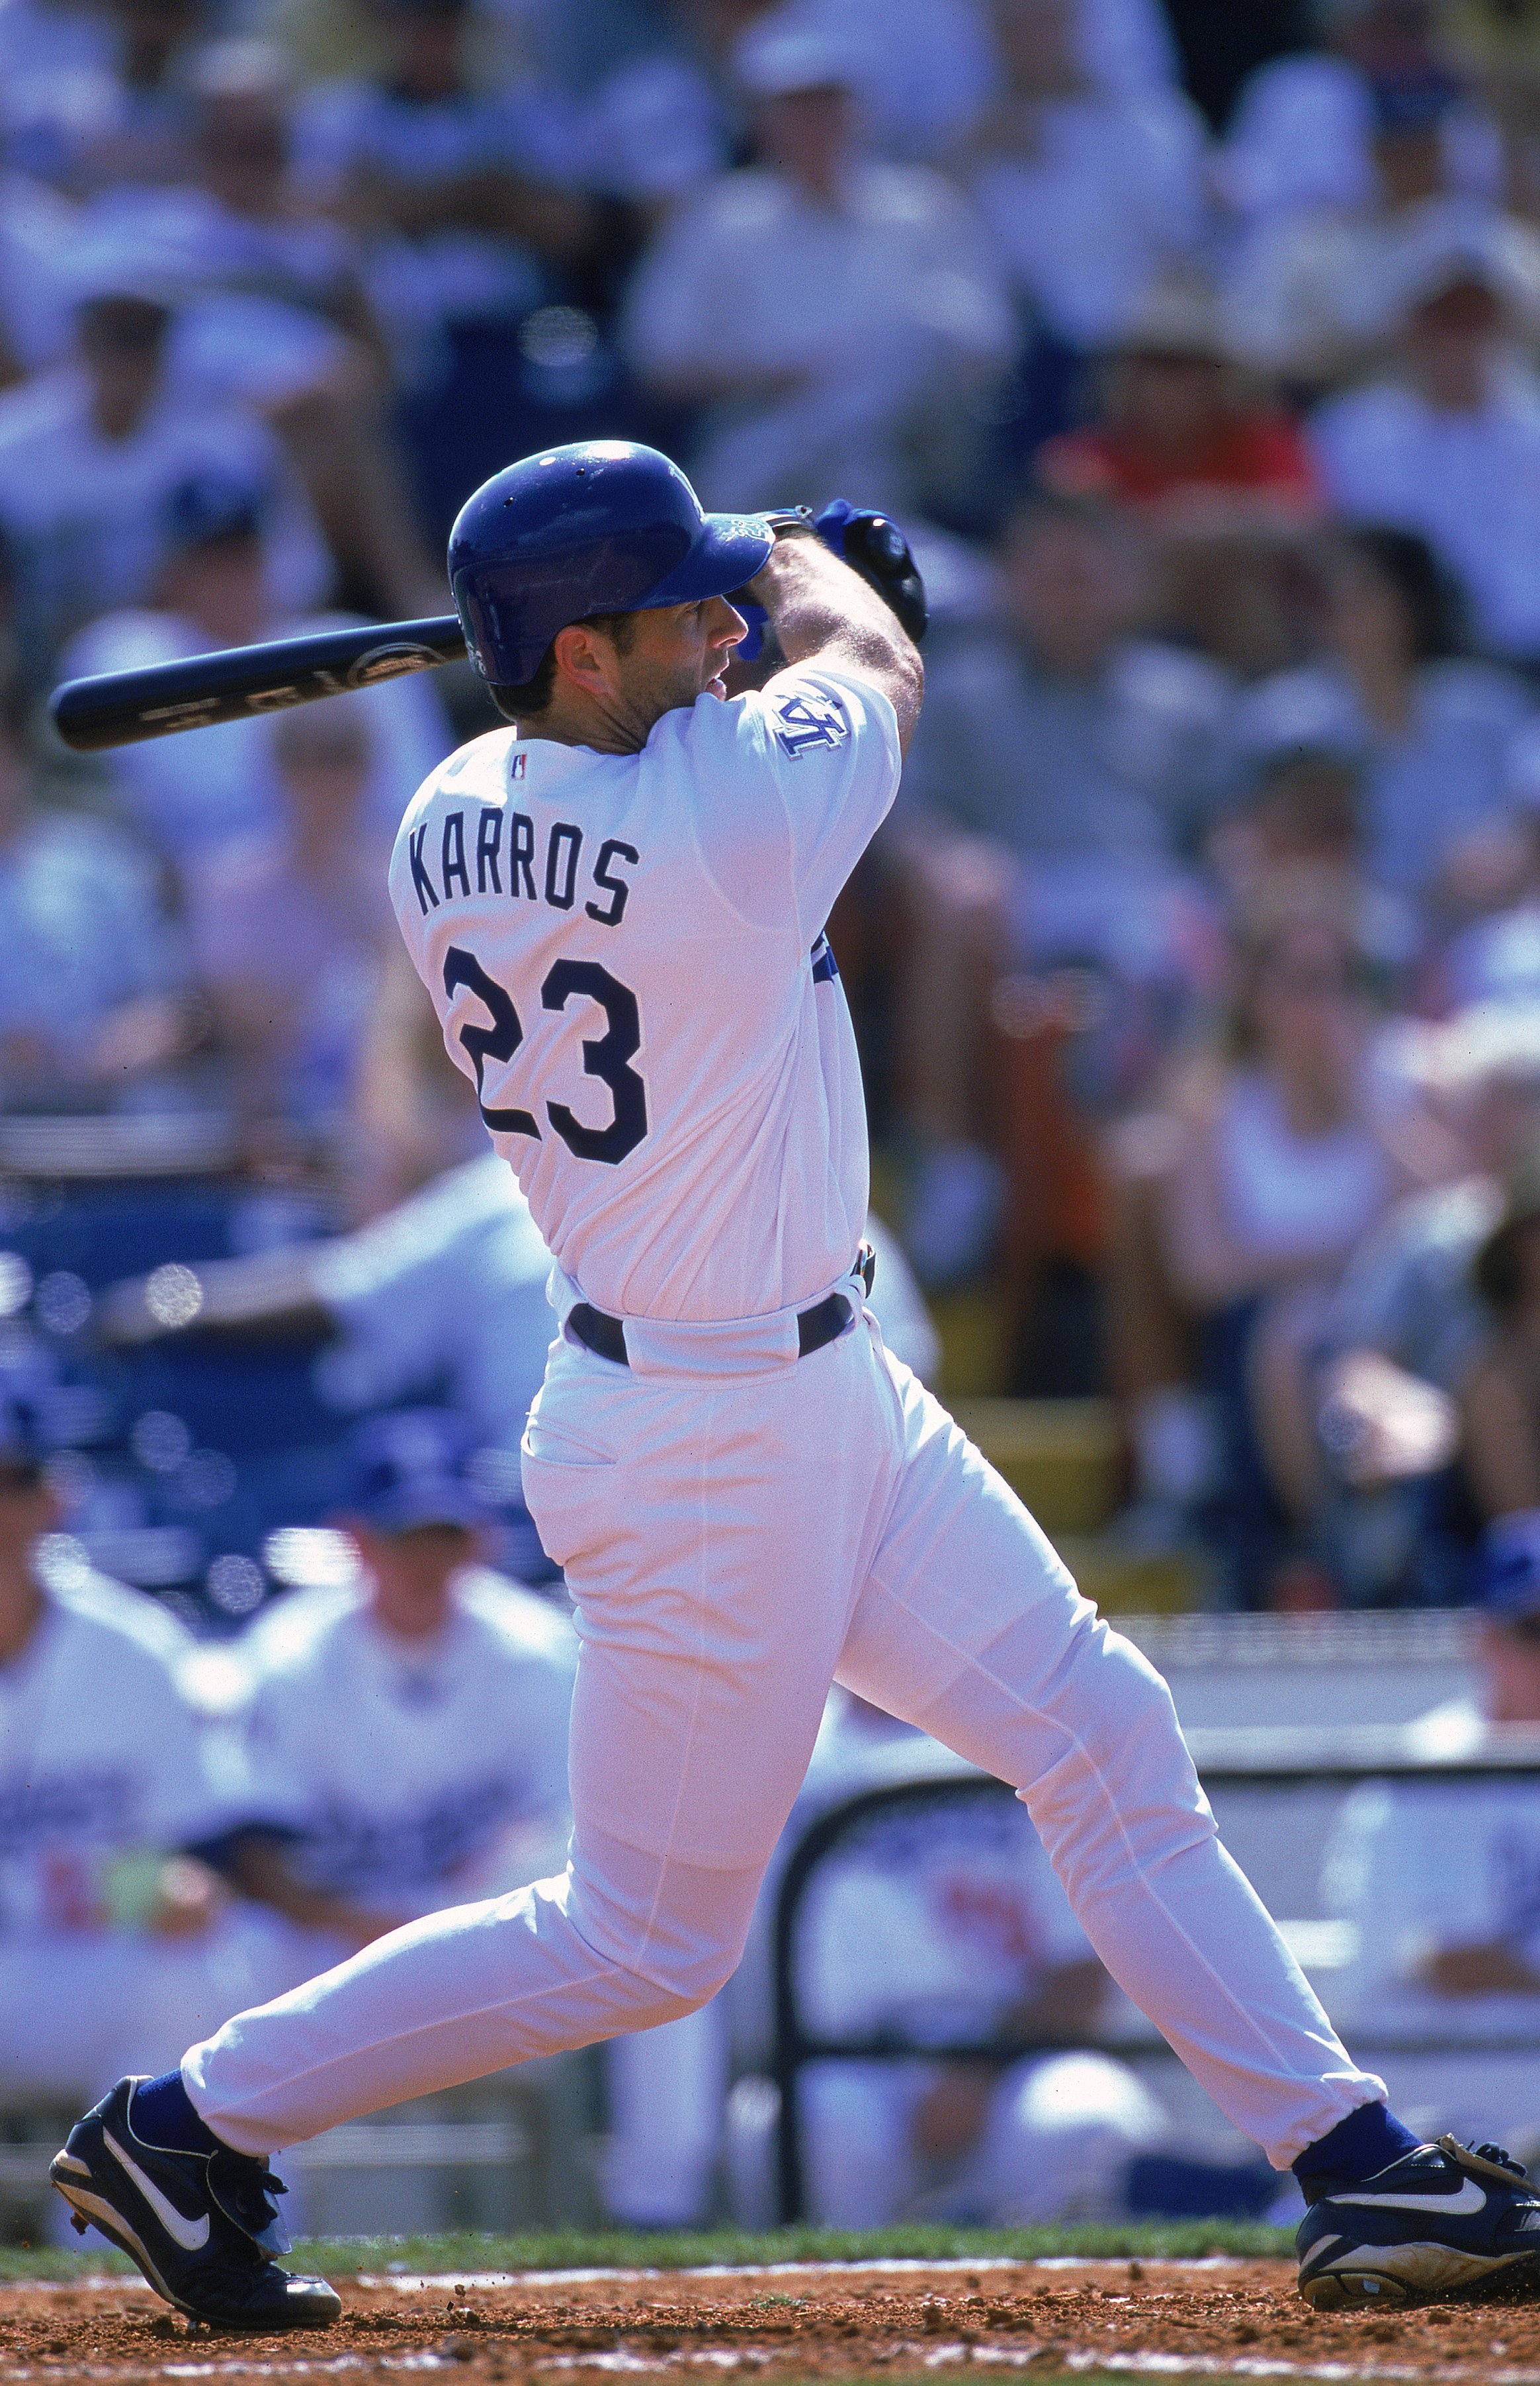 Opinions on Eric Karros : r/Dodgers